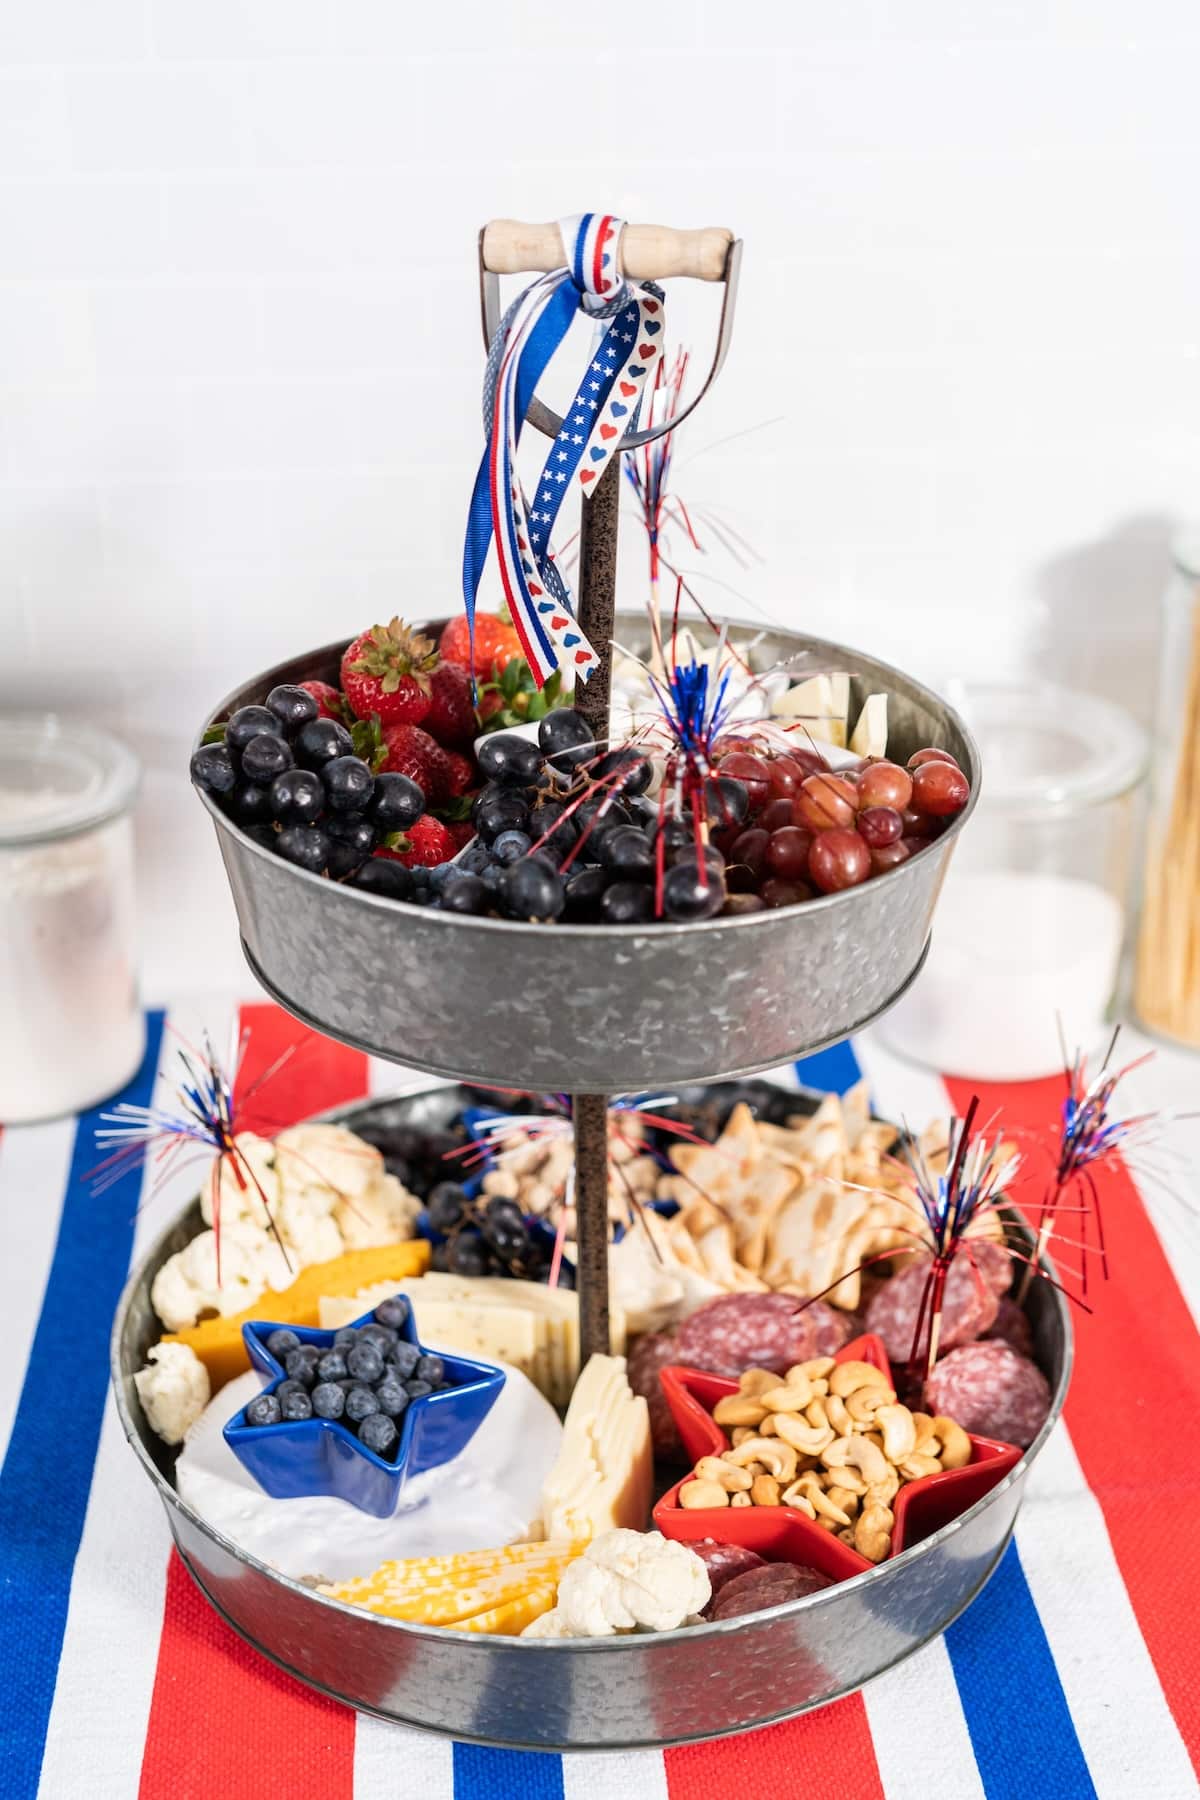 a 4th of July charcuterie board with various snacks in red, white, and blue.